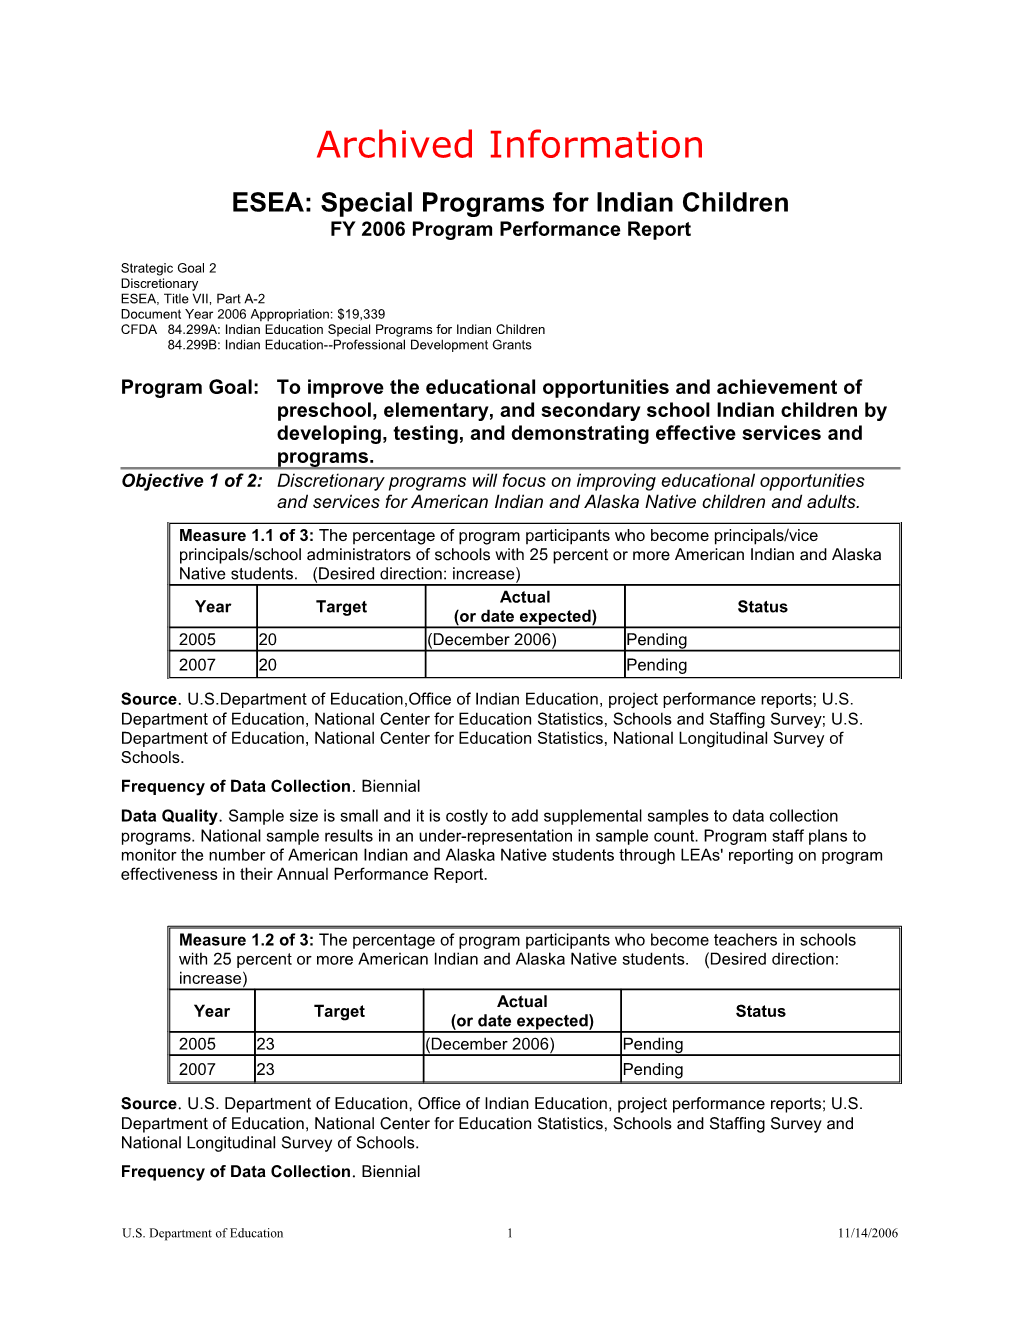 Archived: ESEA: Special Programs for Indian Children (MS Word)